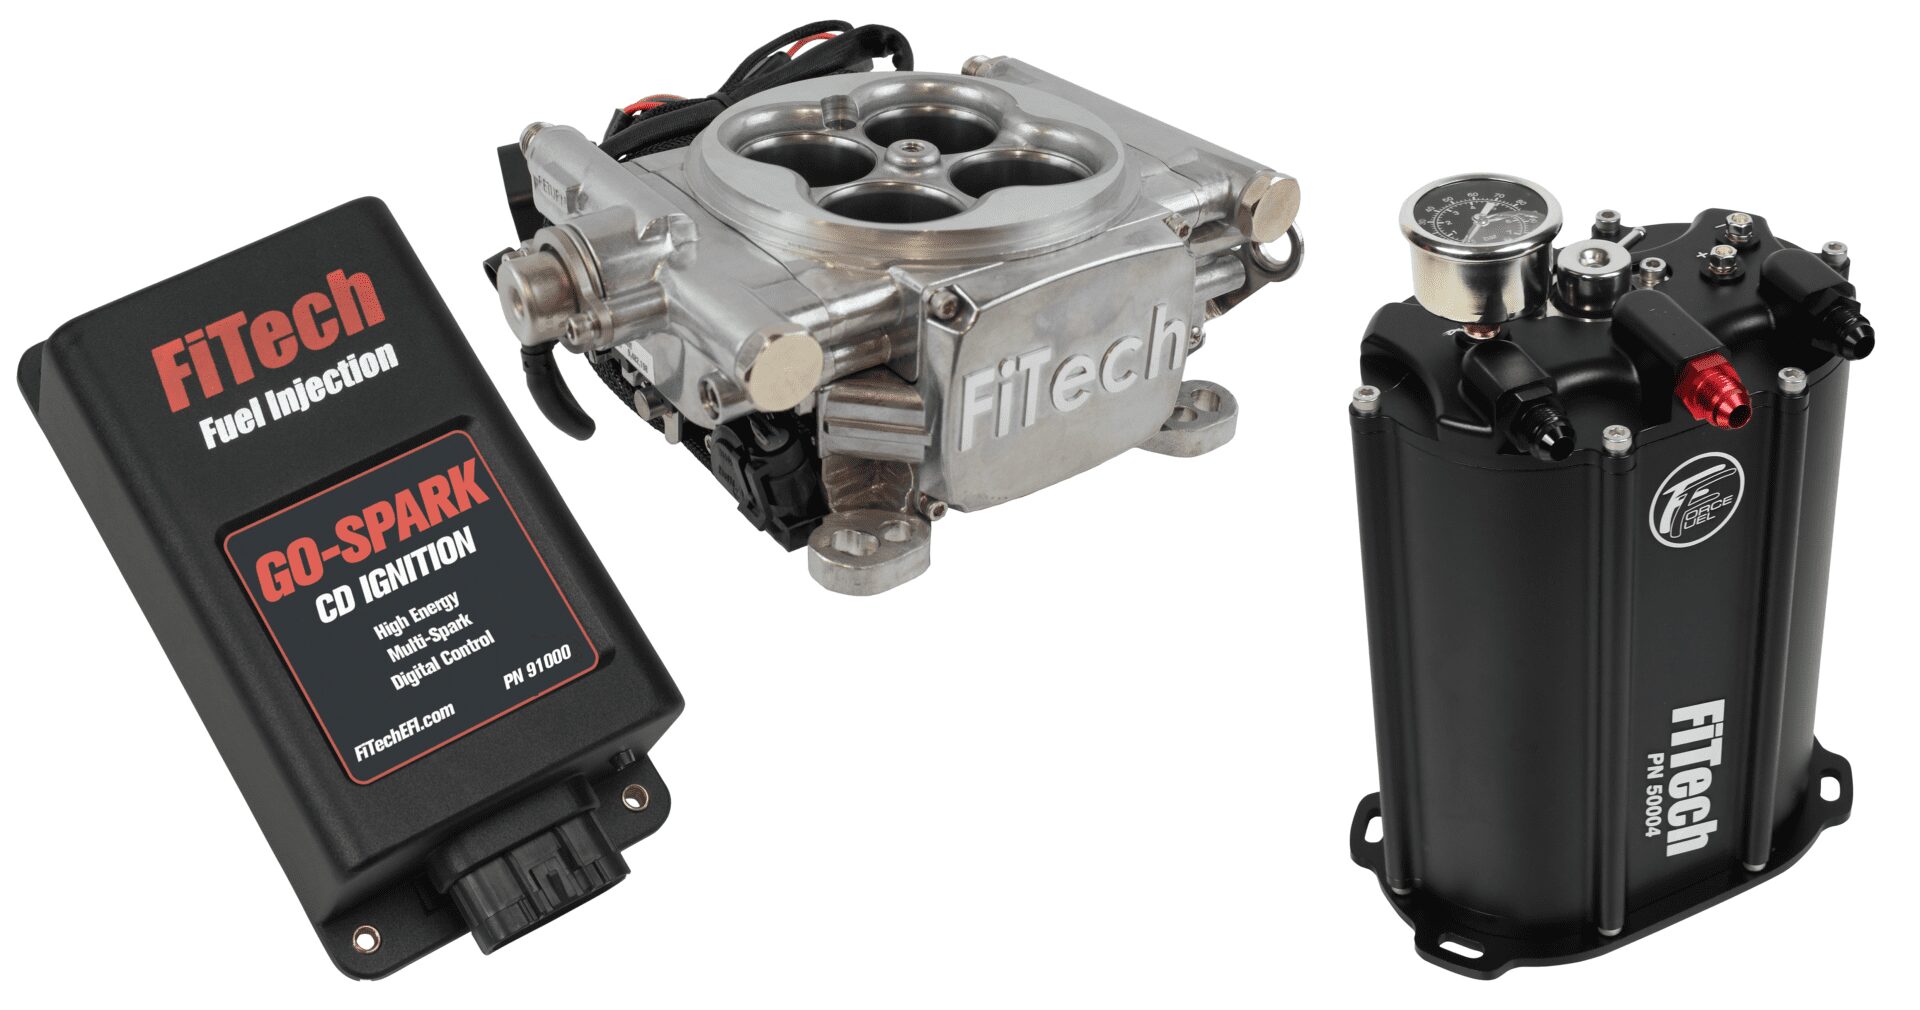 FiTech 93501 Go EFI 4 System (Aluminum Finish) Master Kit w/ Force Fuel, Fuel Delivery System